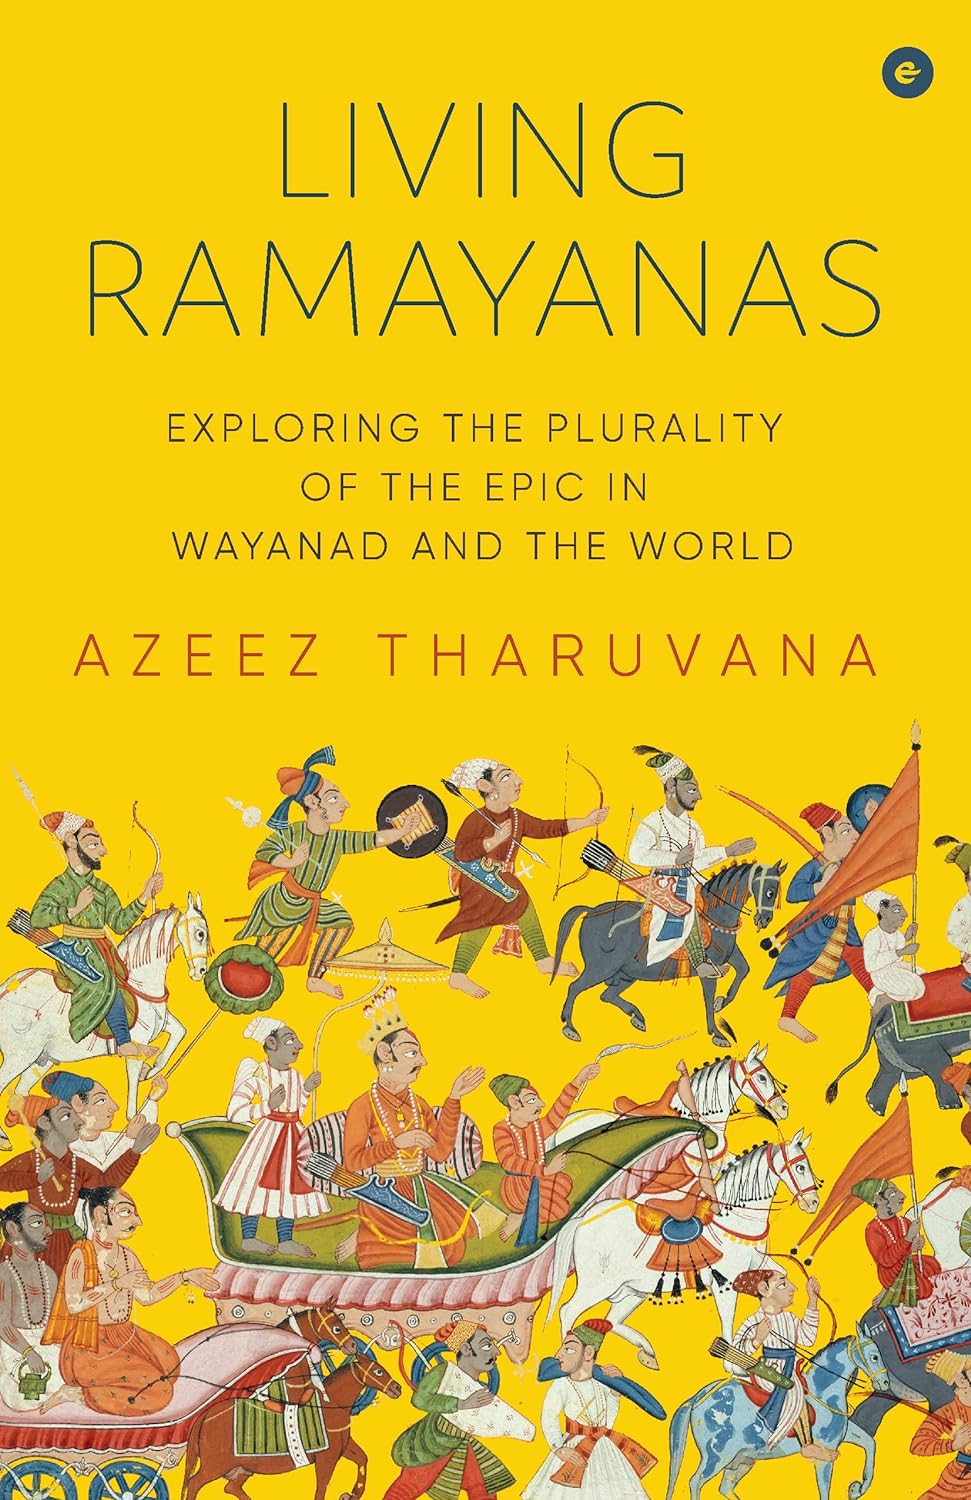 Living Ramayanas: Exploring the Plurality of the Epic in Wayanad and the World